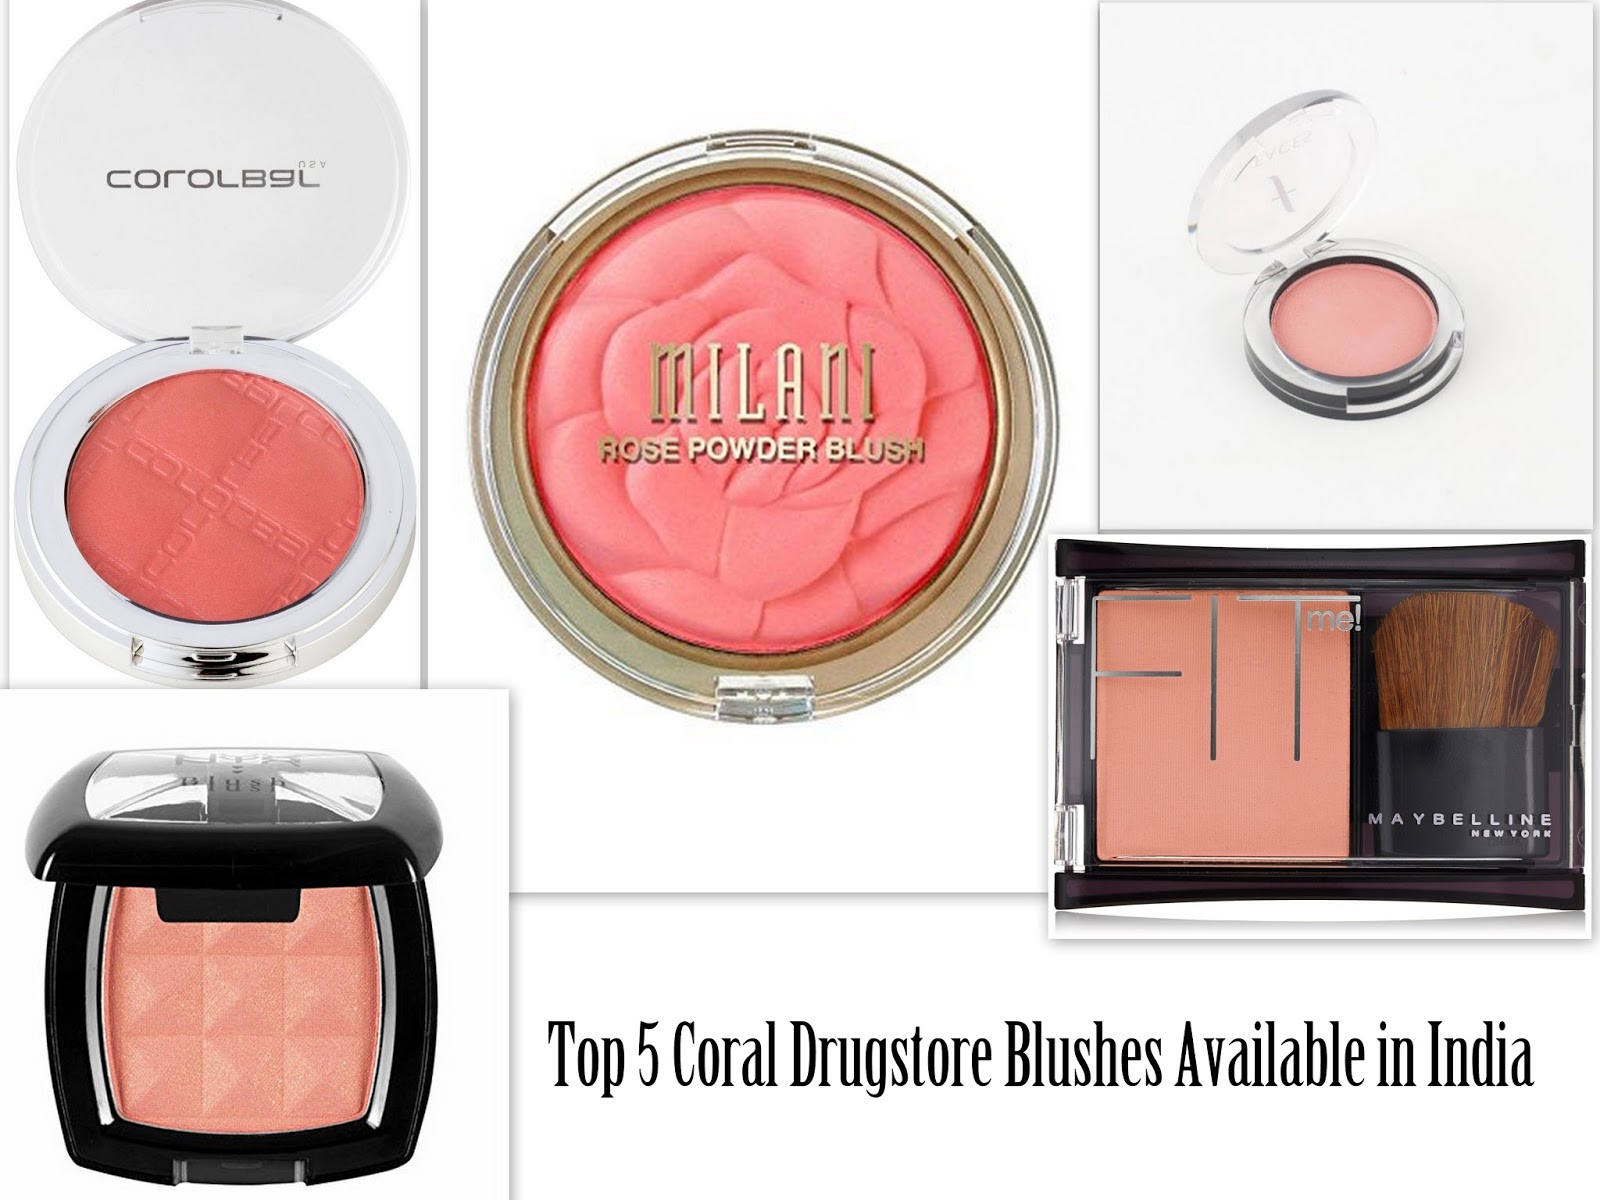 Best coral blushes, Indian beauty blogger, NYX Blush Coral Dream, Milani, Faces, Colorbar, Maybelline, coral drugstore blushes, Top 5 Coral Blushes available in India, Top Coral Blushes in India, 